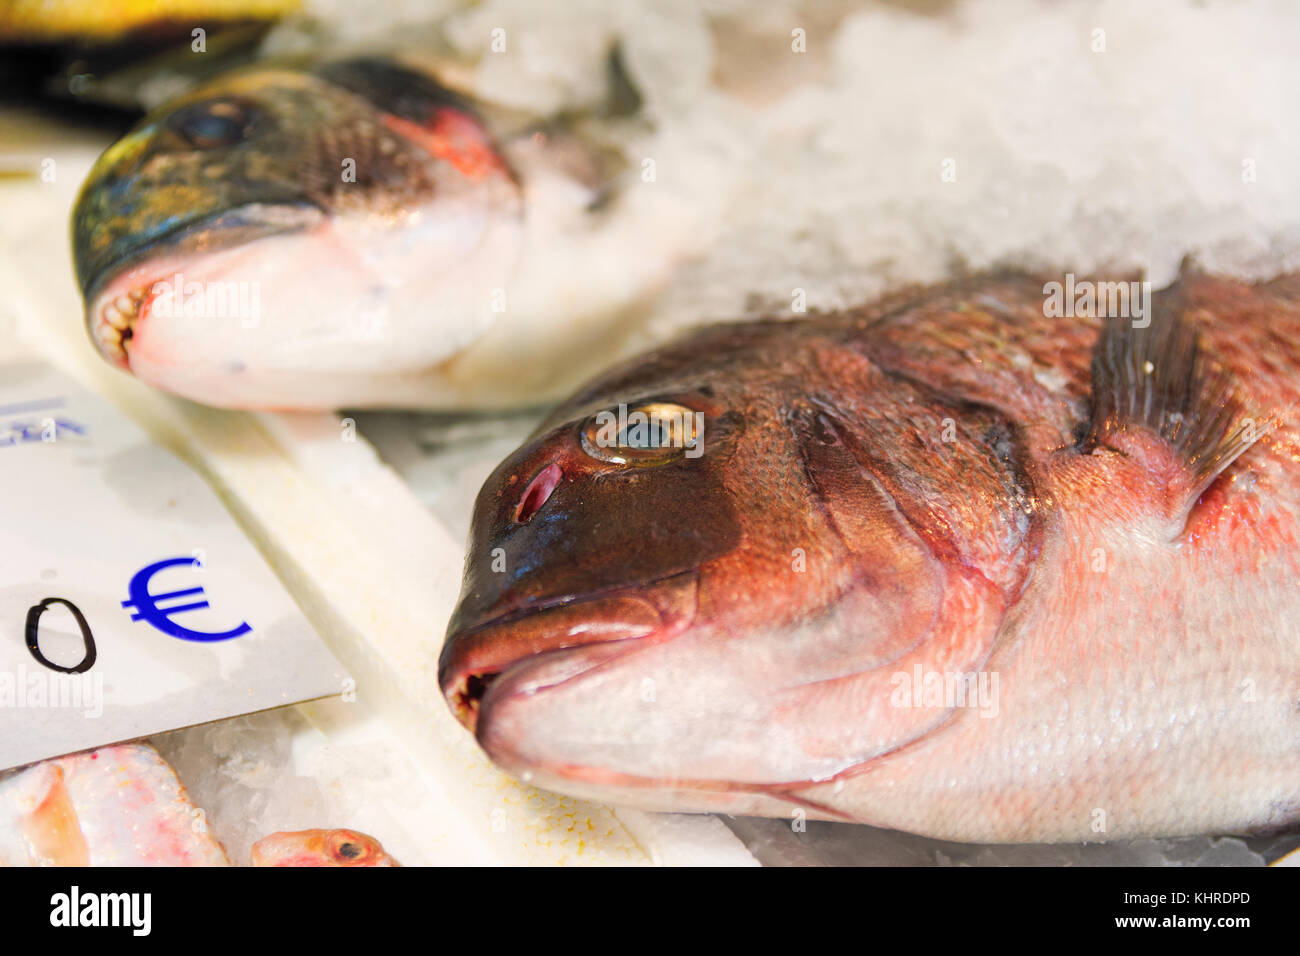 Close-Up Of Freshly Caught Red Porgy Or Pagrus Pagrus On Ice Lined Up For Sale In The Greek Fish Market Stock Photo